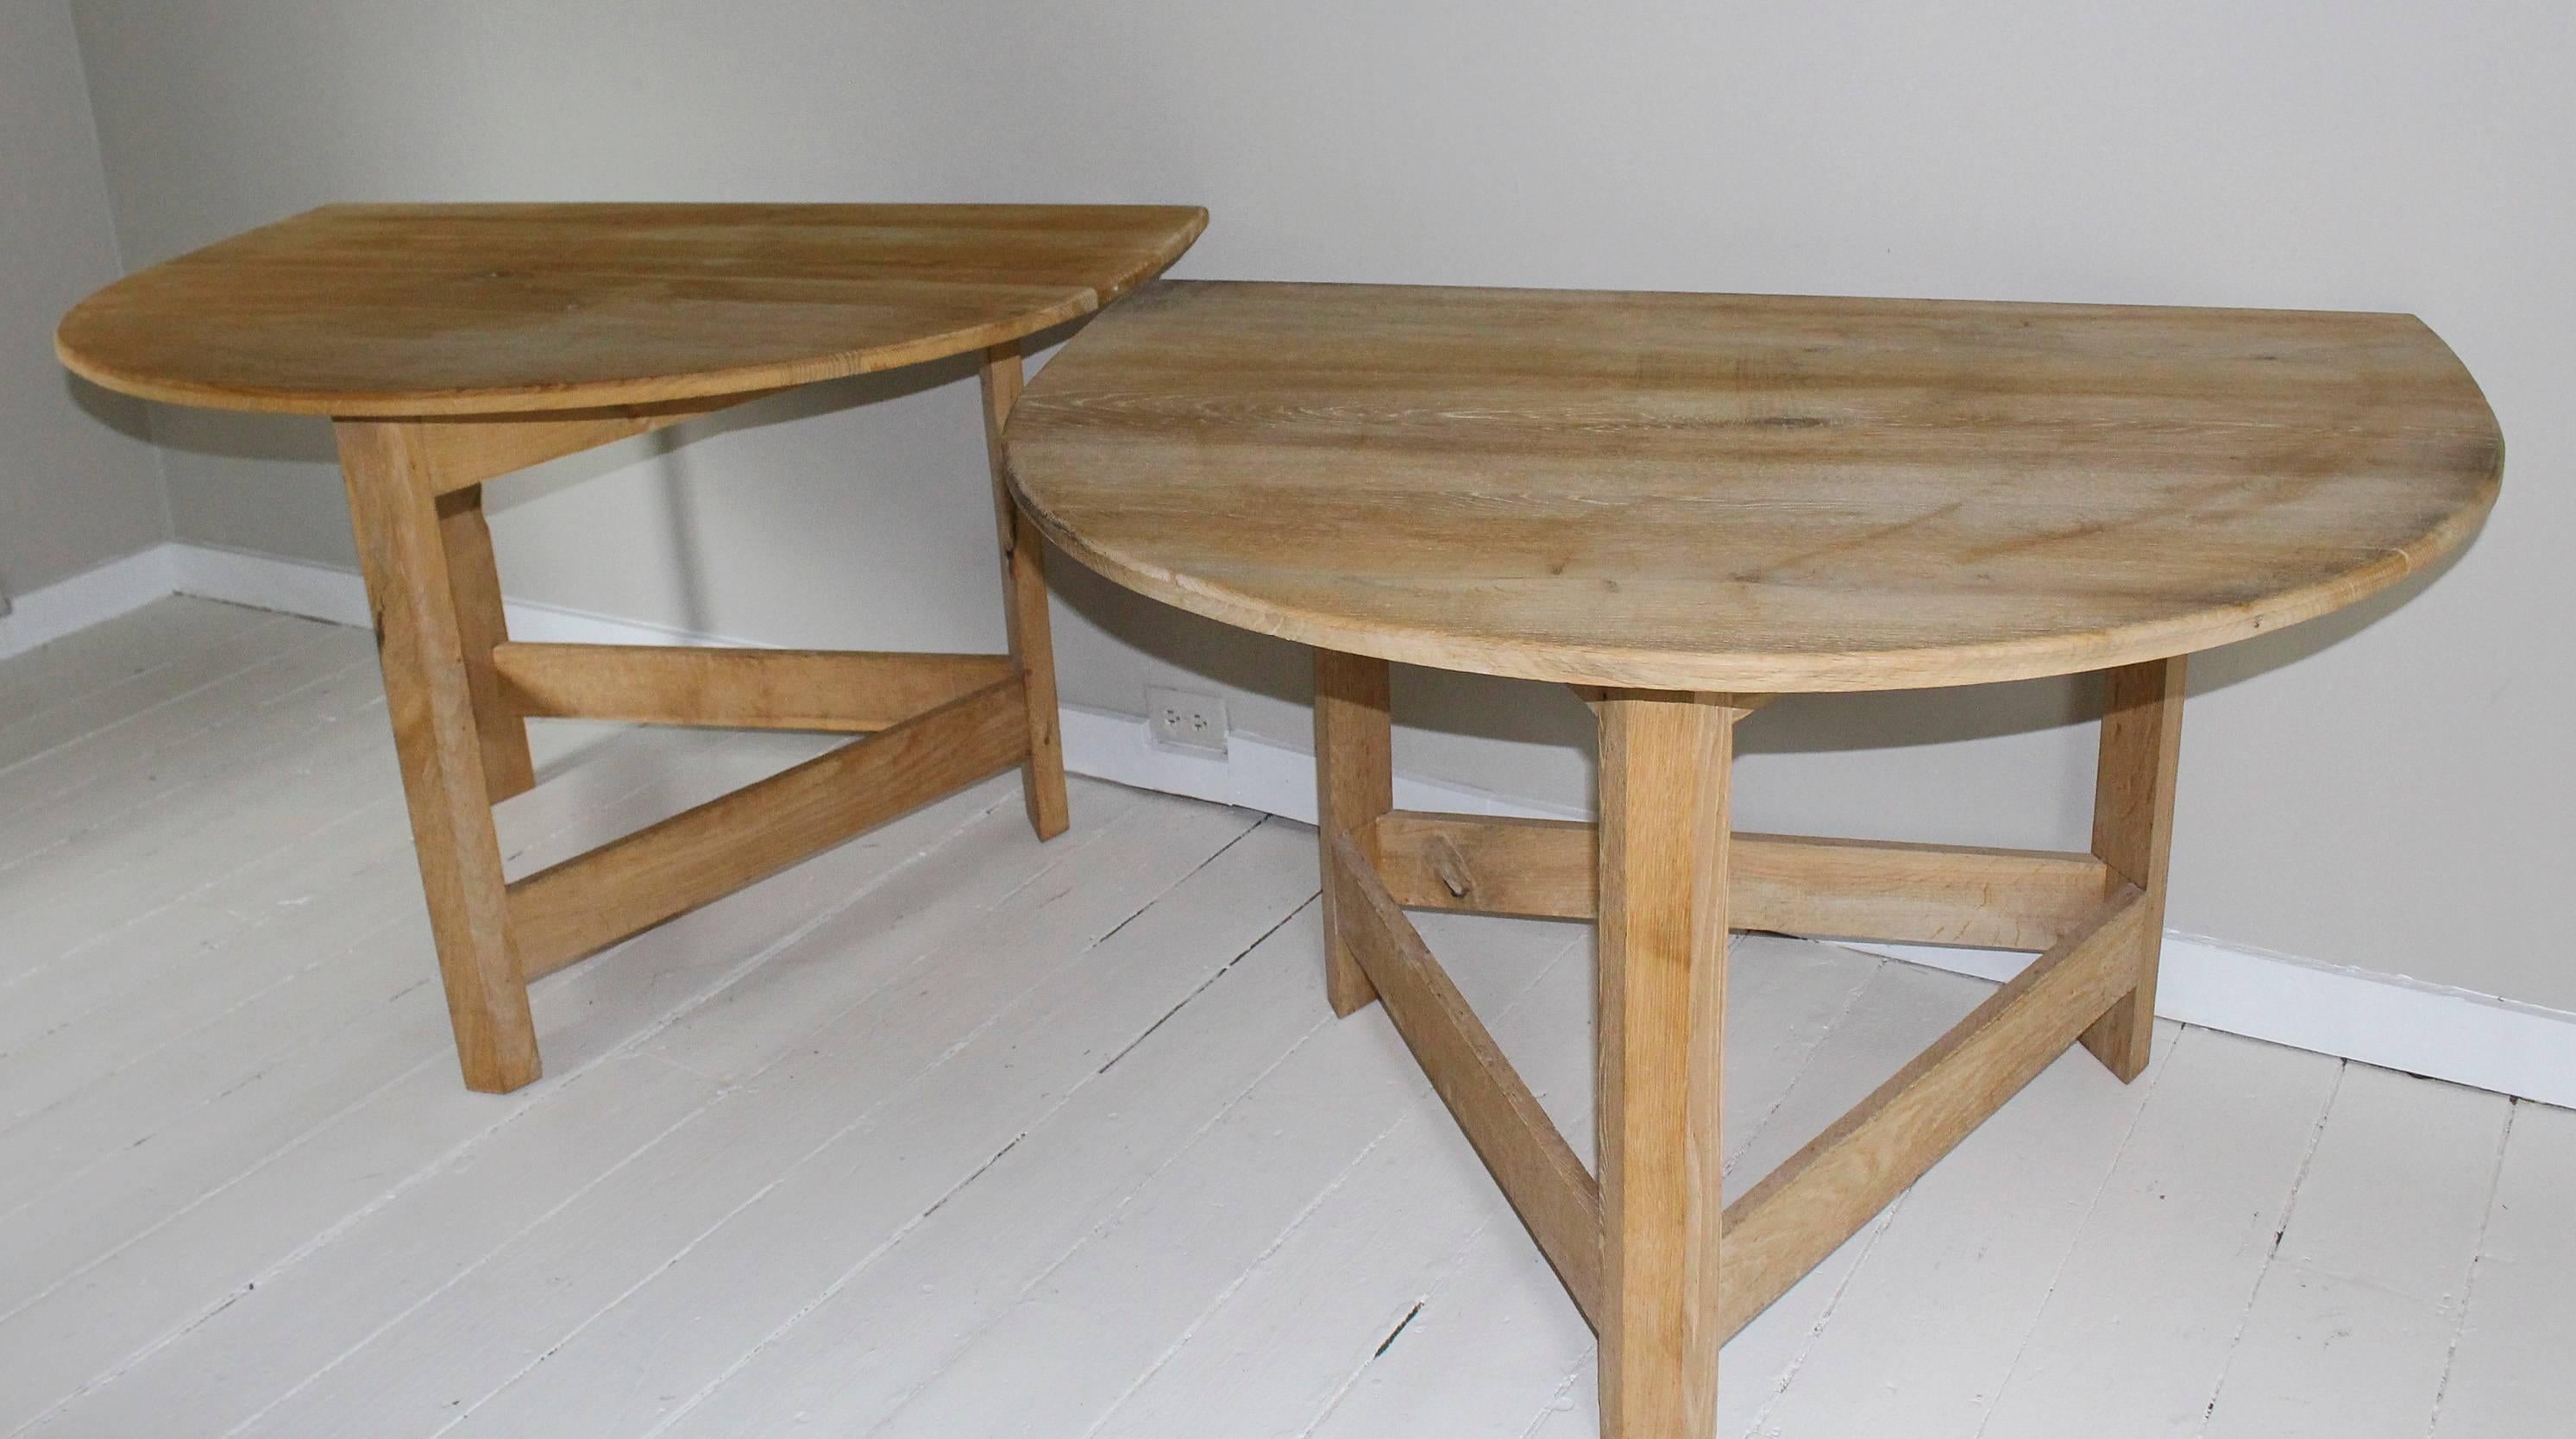 Pair of similar modern demilune tables in bleached maple with removable top hand-crafted of boards supported by three angular legs with stretchers. One table measures 45.5